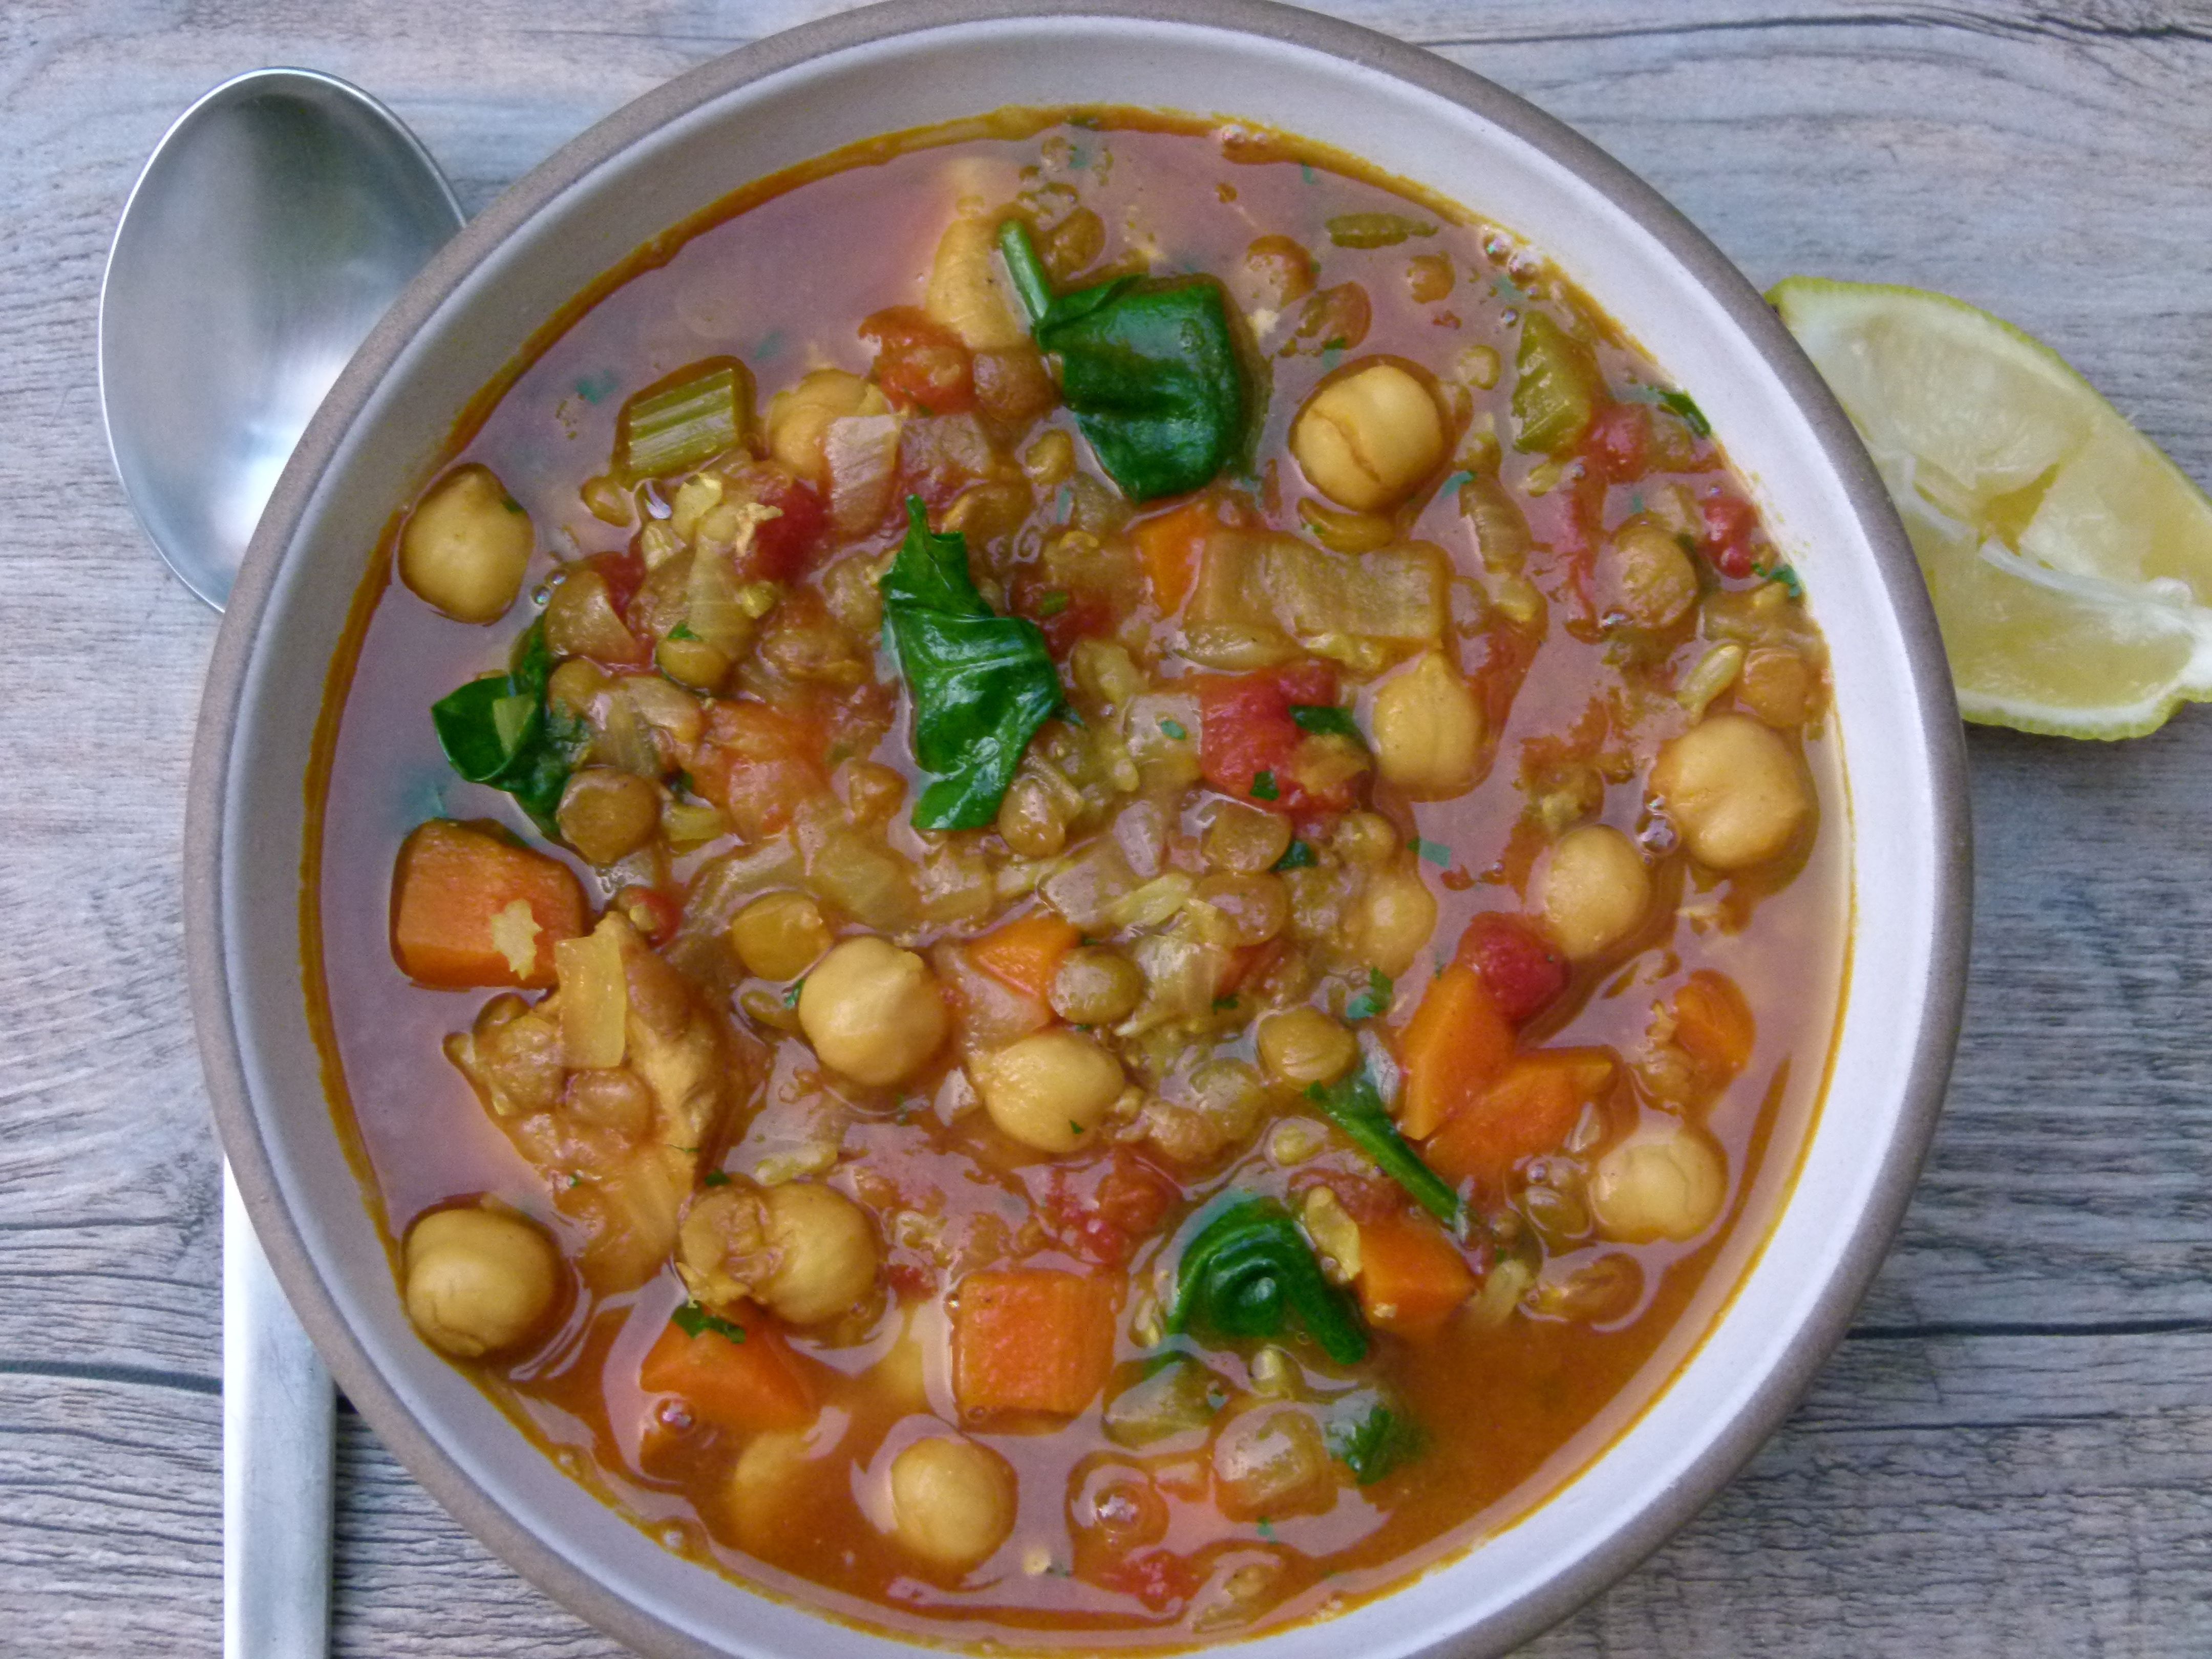 Harira (Moroccan stew with chicken, chickpeas, lentils and rice)